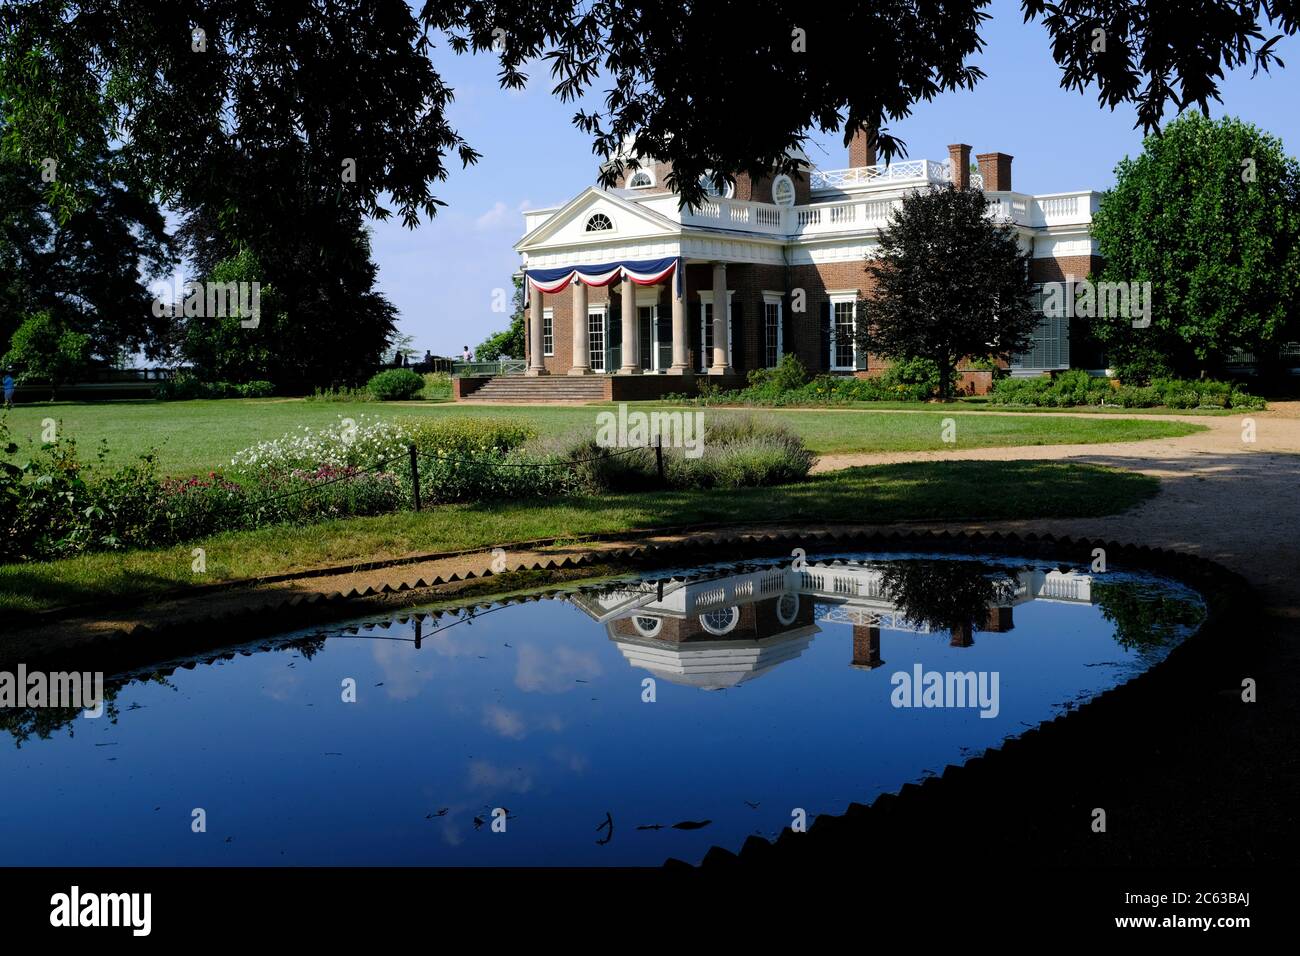 Monticello, with its reflection in a fish pond Stock Photo